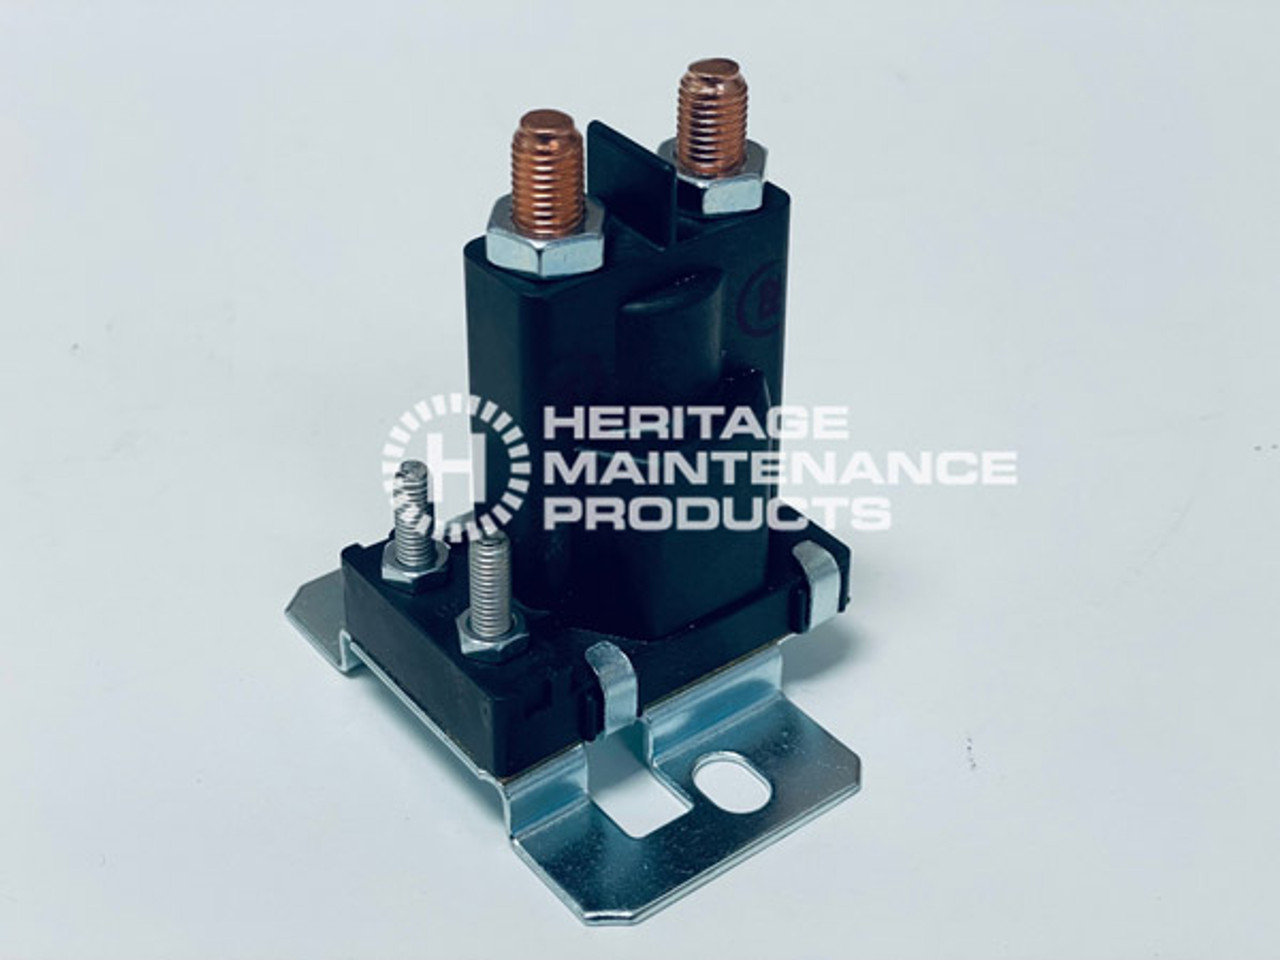 TN 386810 36V 100A Contactor for Tennant. Fits Tennant 515, 515SS, 5700XP, and 8010. Priced Each. Replaces Tennant 386810, 375091, 04685. Our Part Number TN 386810